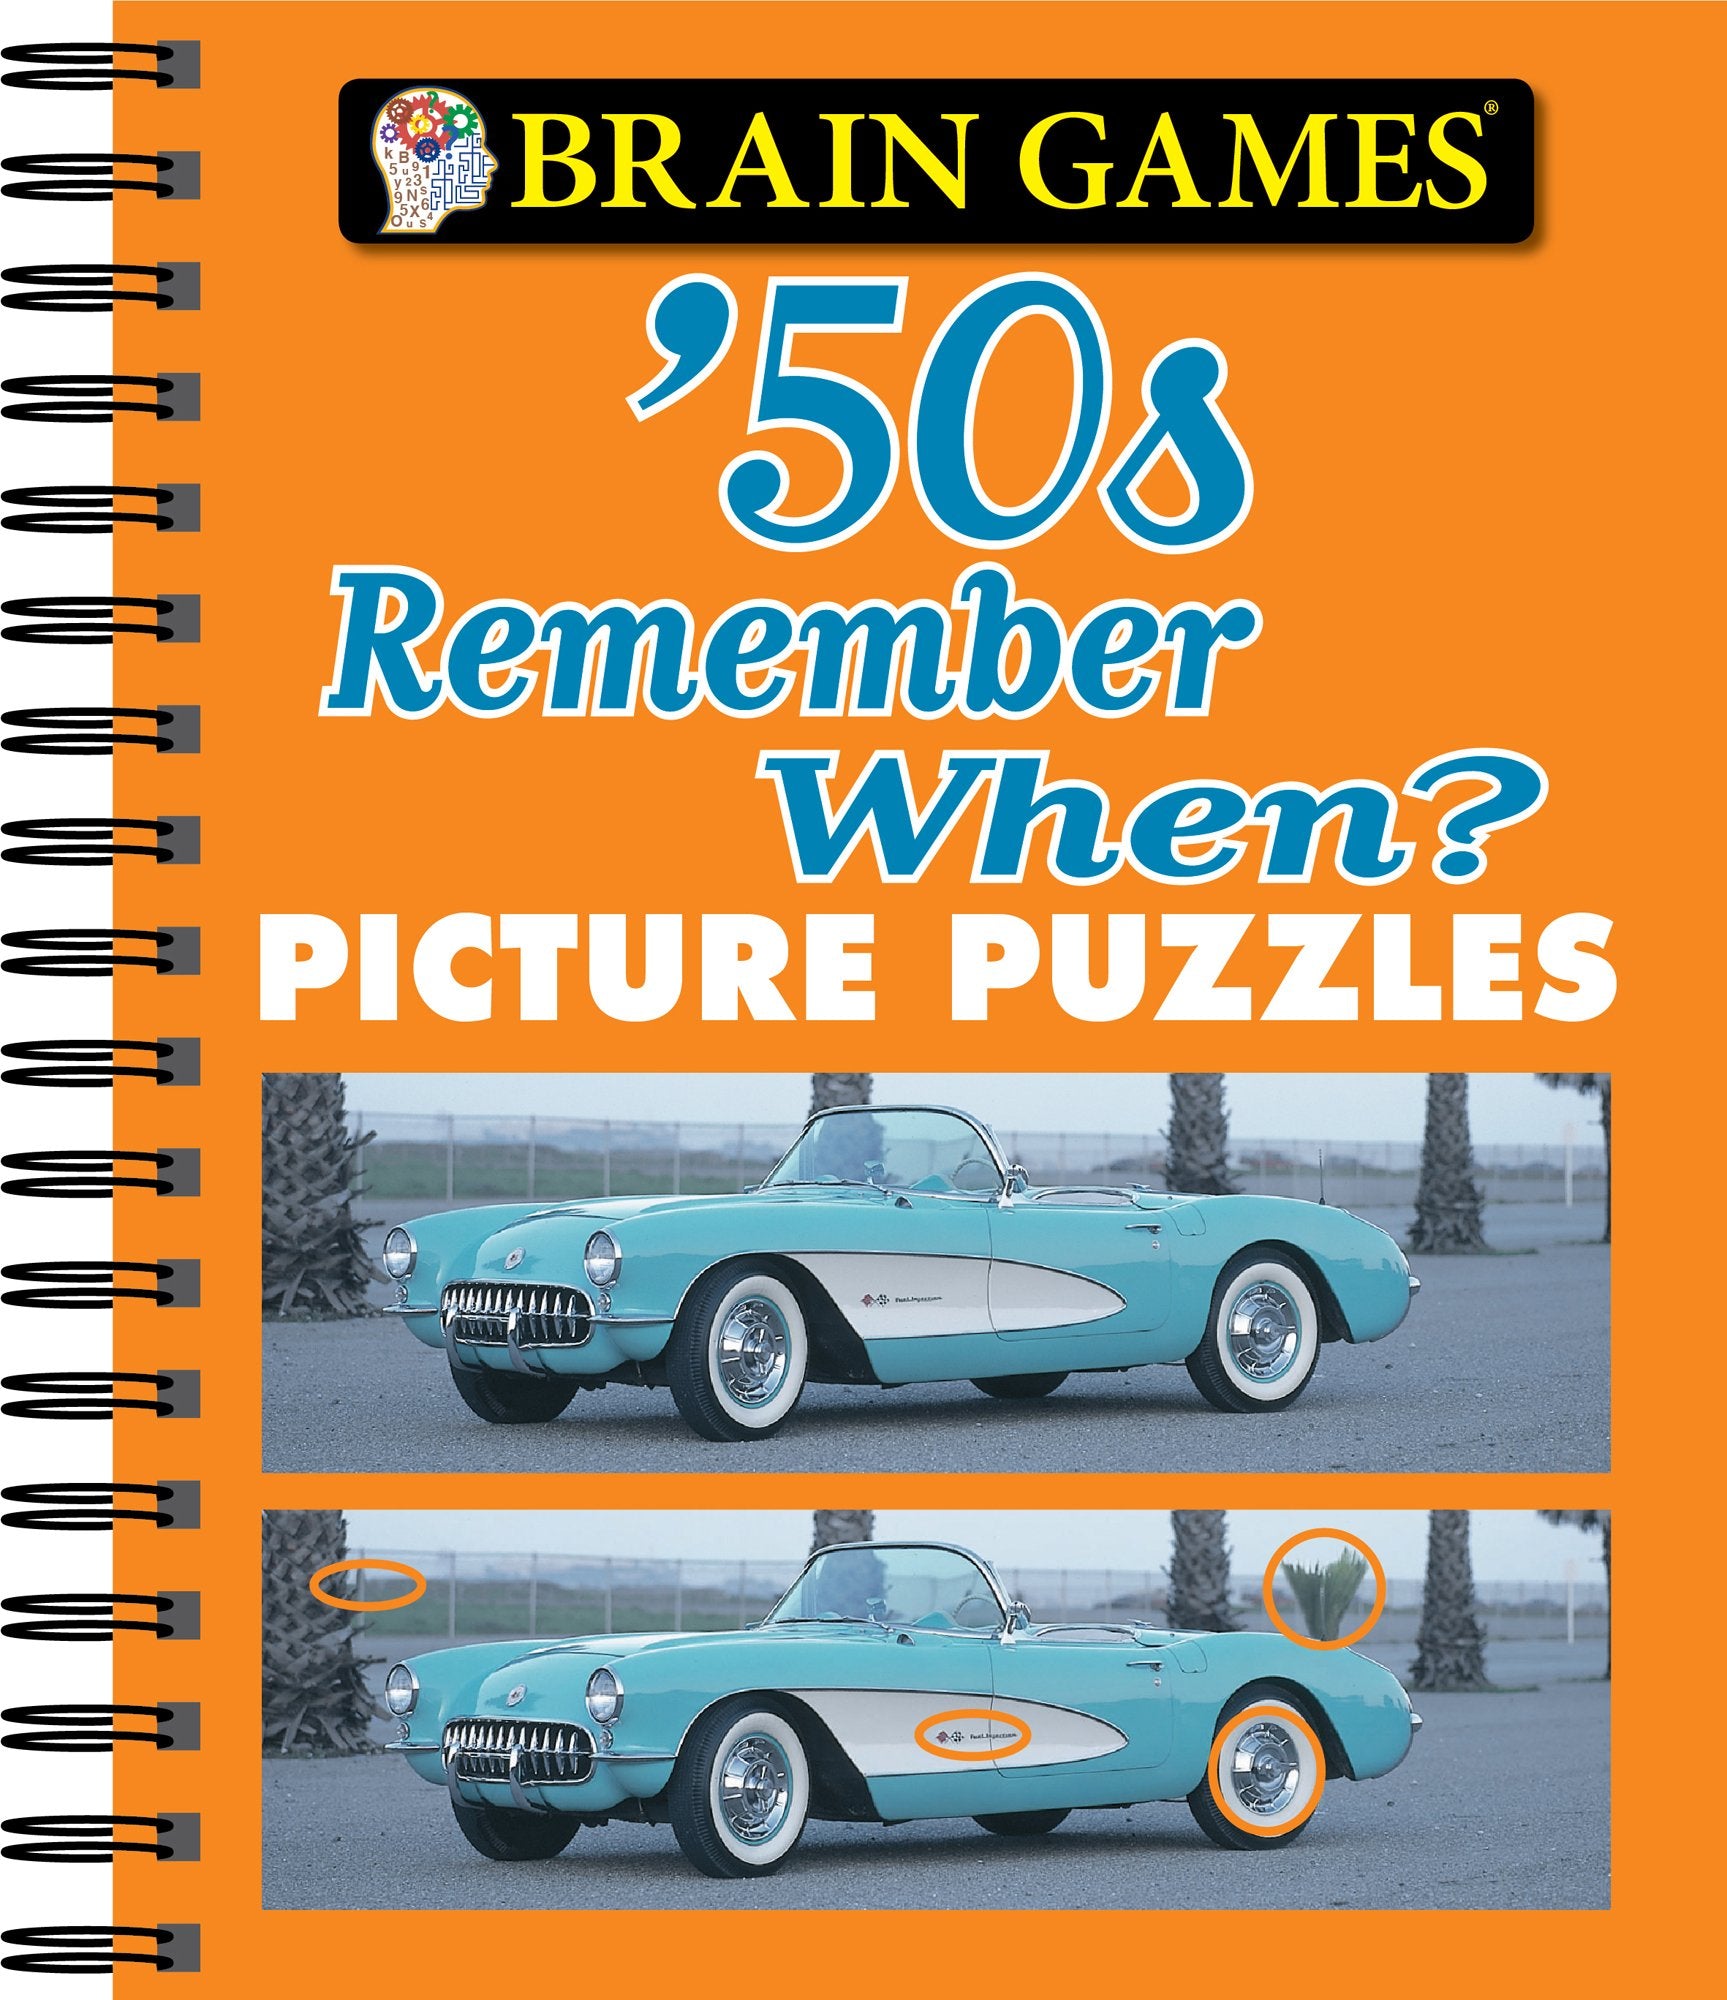 Brain Games - Picture Puzzles: '50s Remember When? by Publications International Ltd